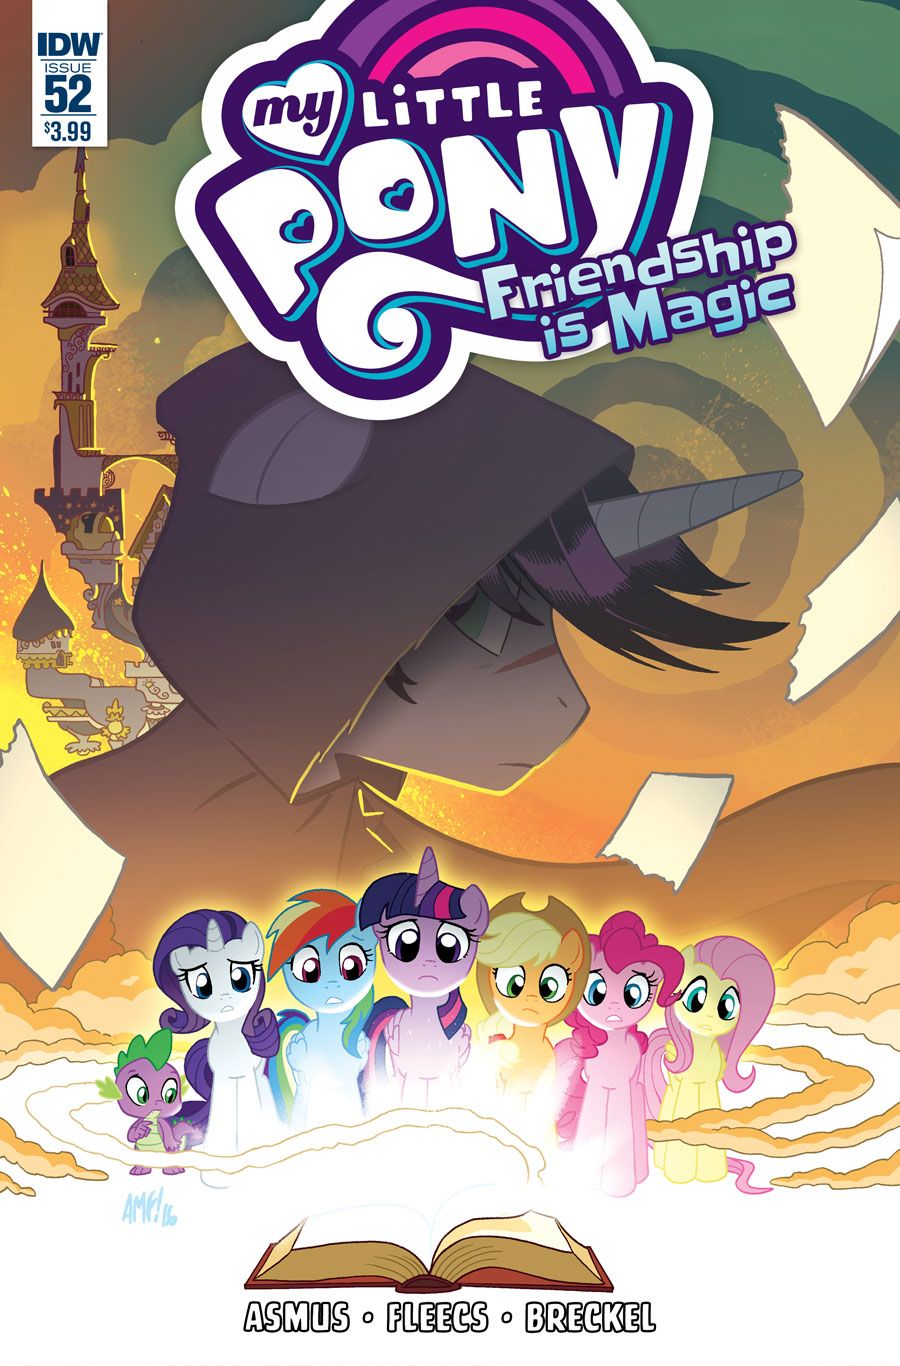 mlp52-cover